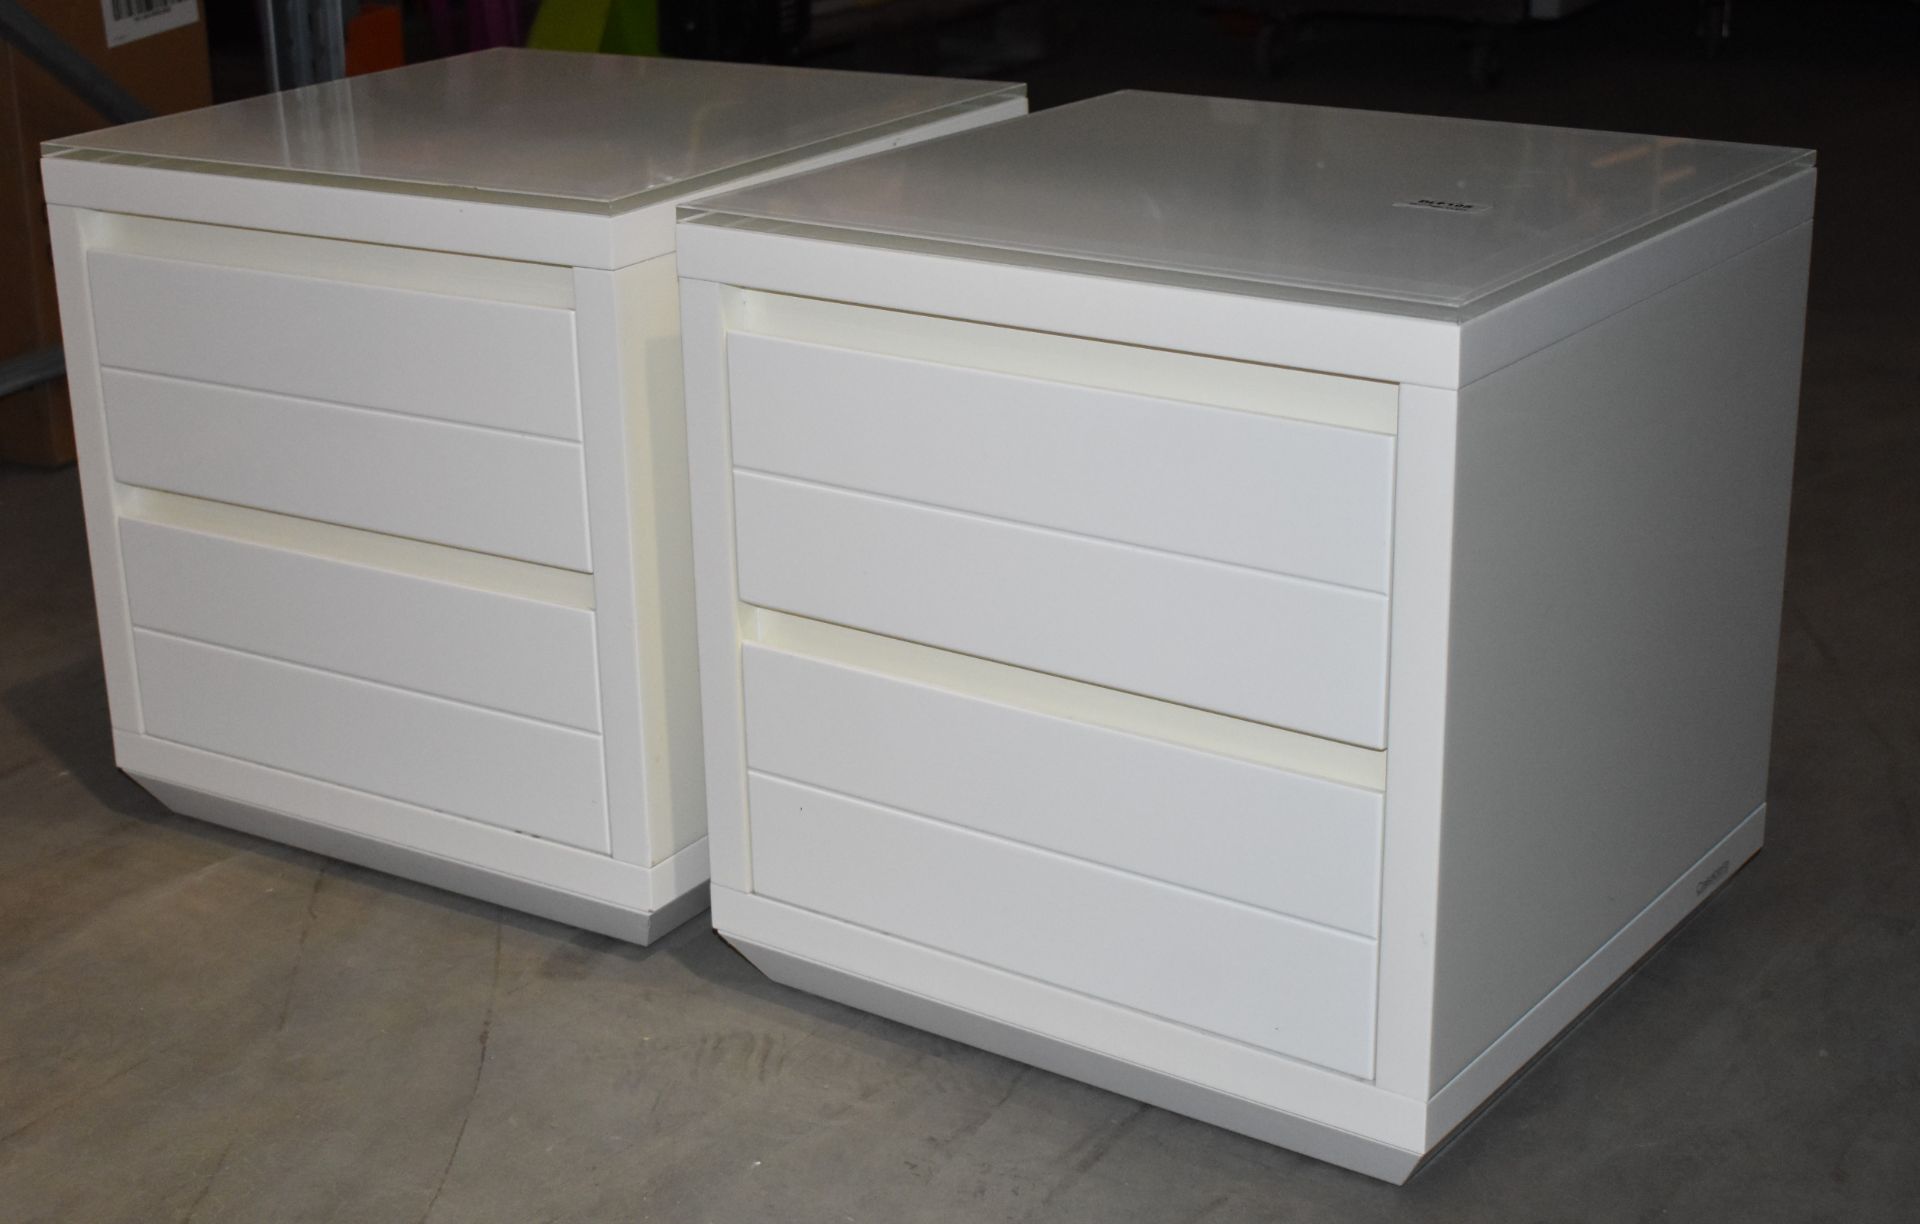 1 Pair of Casabella Adria Bedside Drawers - White Gloss With Glass Top and Soft Close Drawers  -